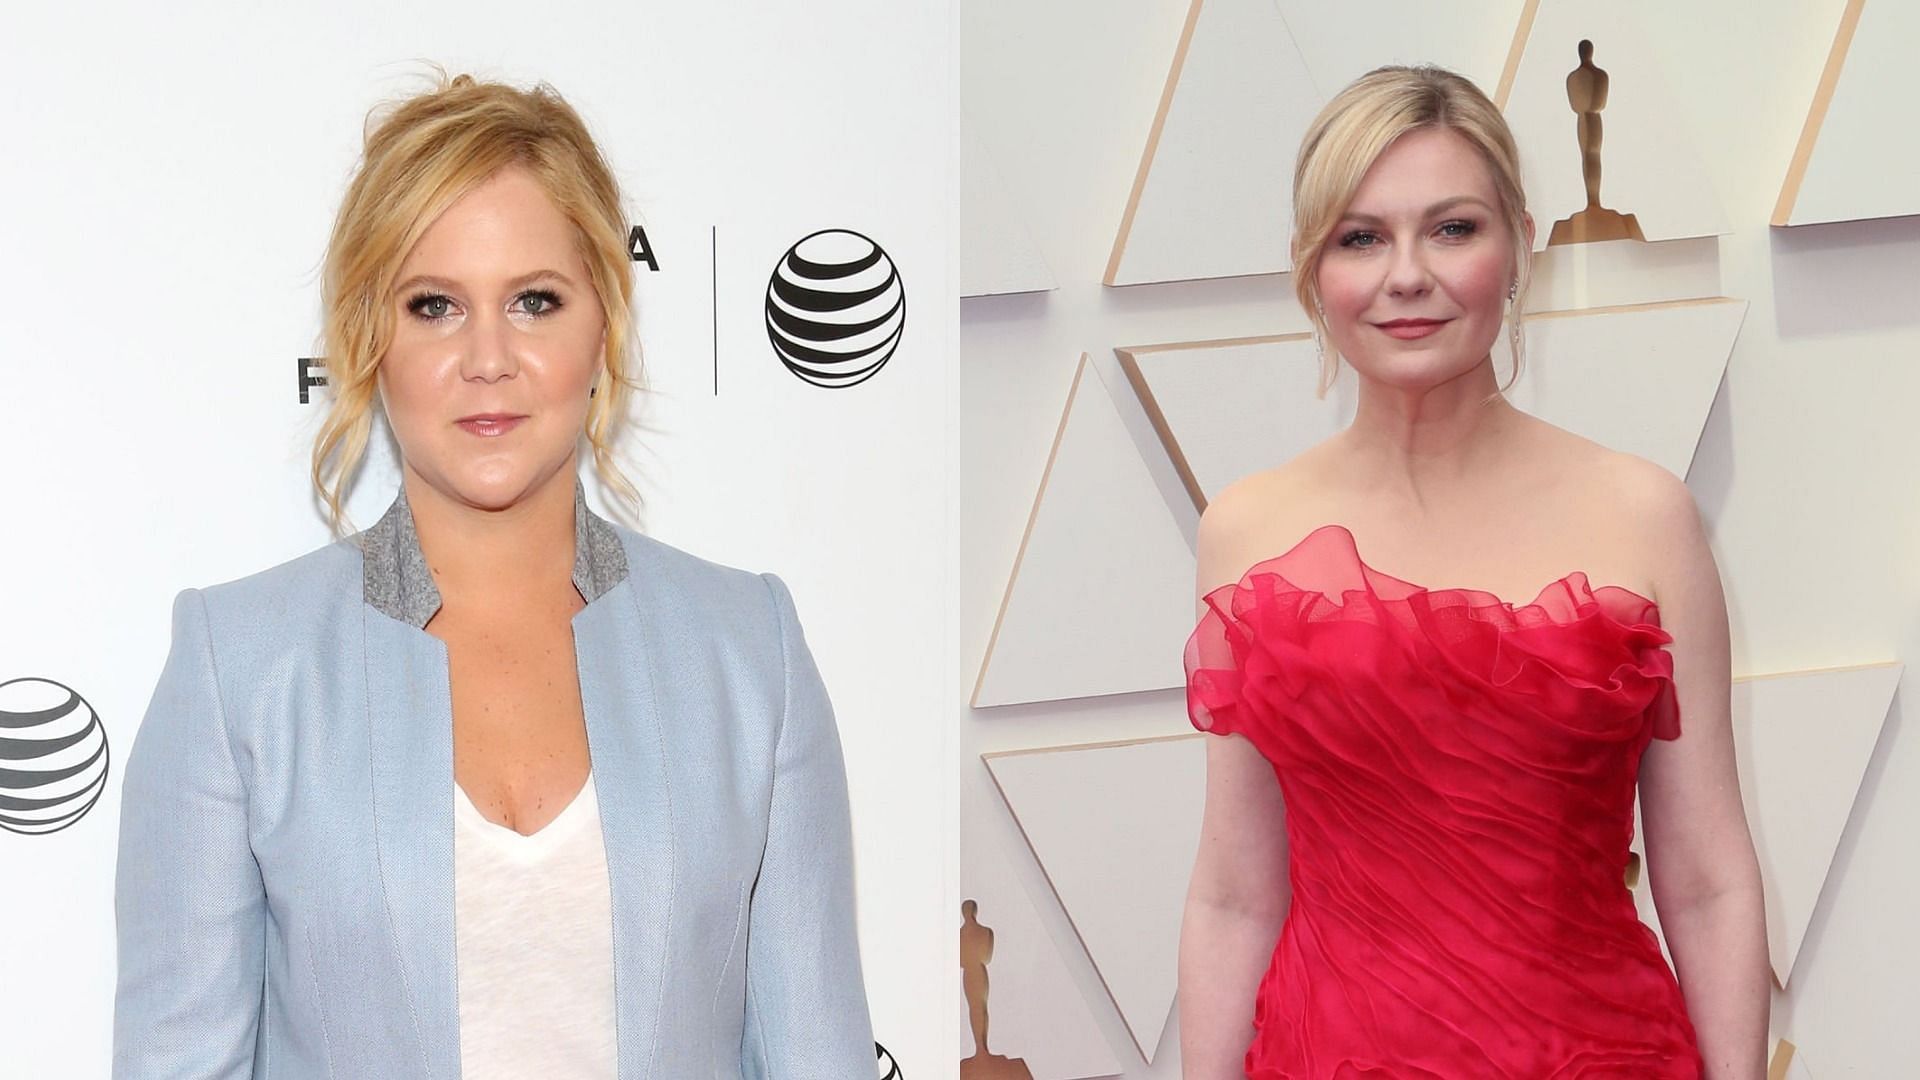 Amy Schumer revealed she received &quot;death threats&quot; for jokingly calling Kirsten Dunst a &quot;seat filler&quot; at the 2022 Oscars (Image via Robin Marchant/Getty Images and David Livingston/Getty Images)